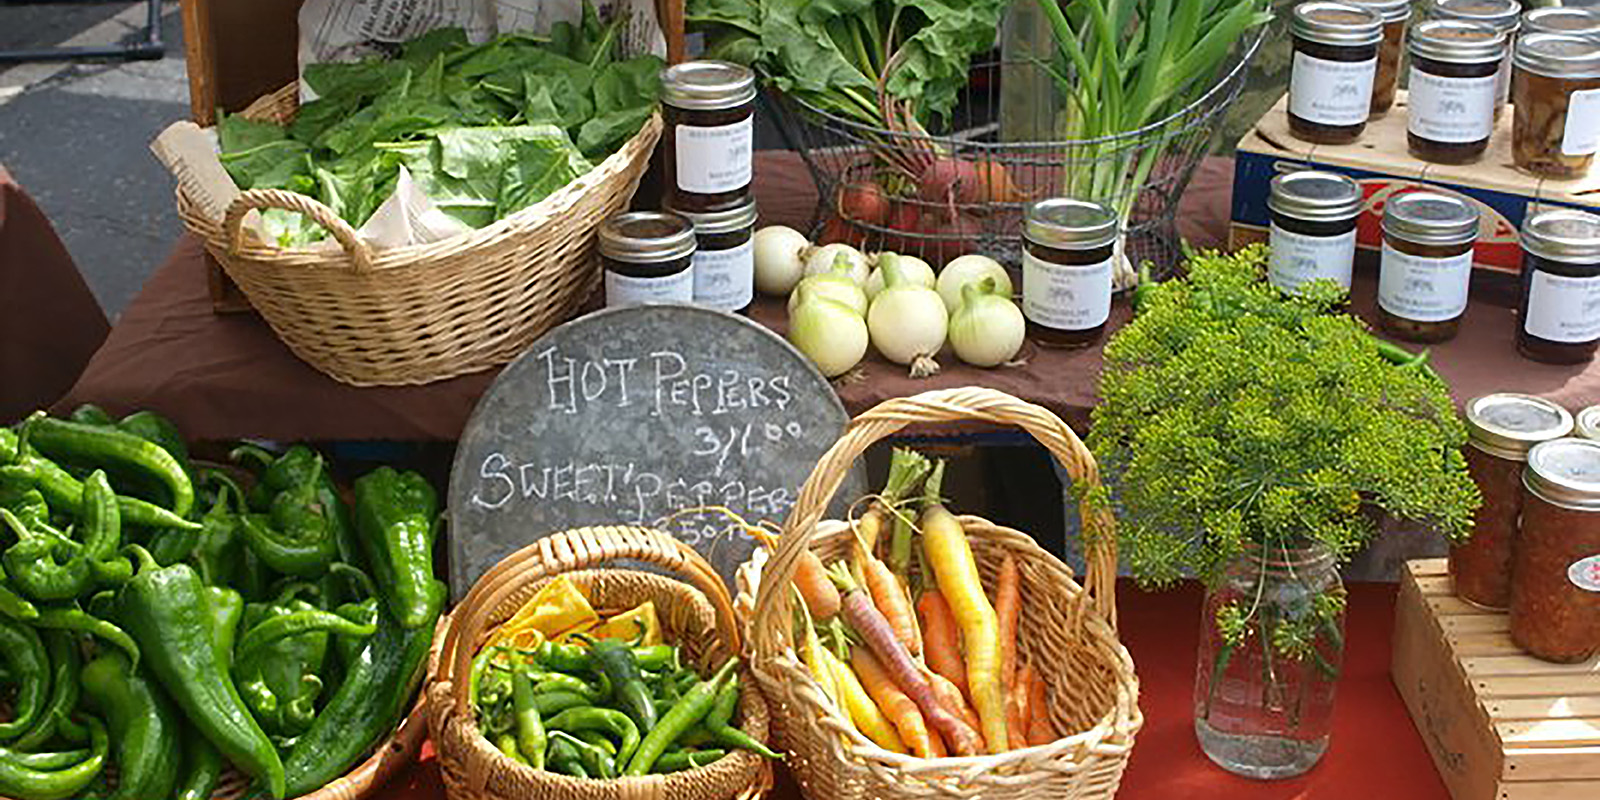 carrots onions peppers beets and jars of food on farmers market table